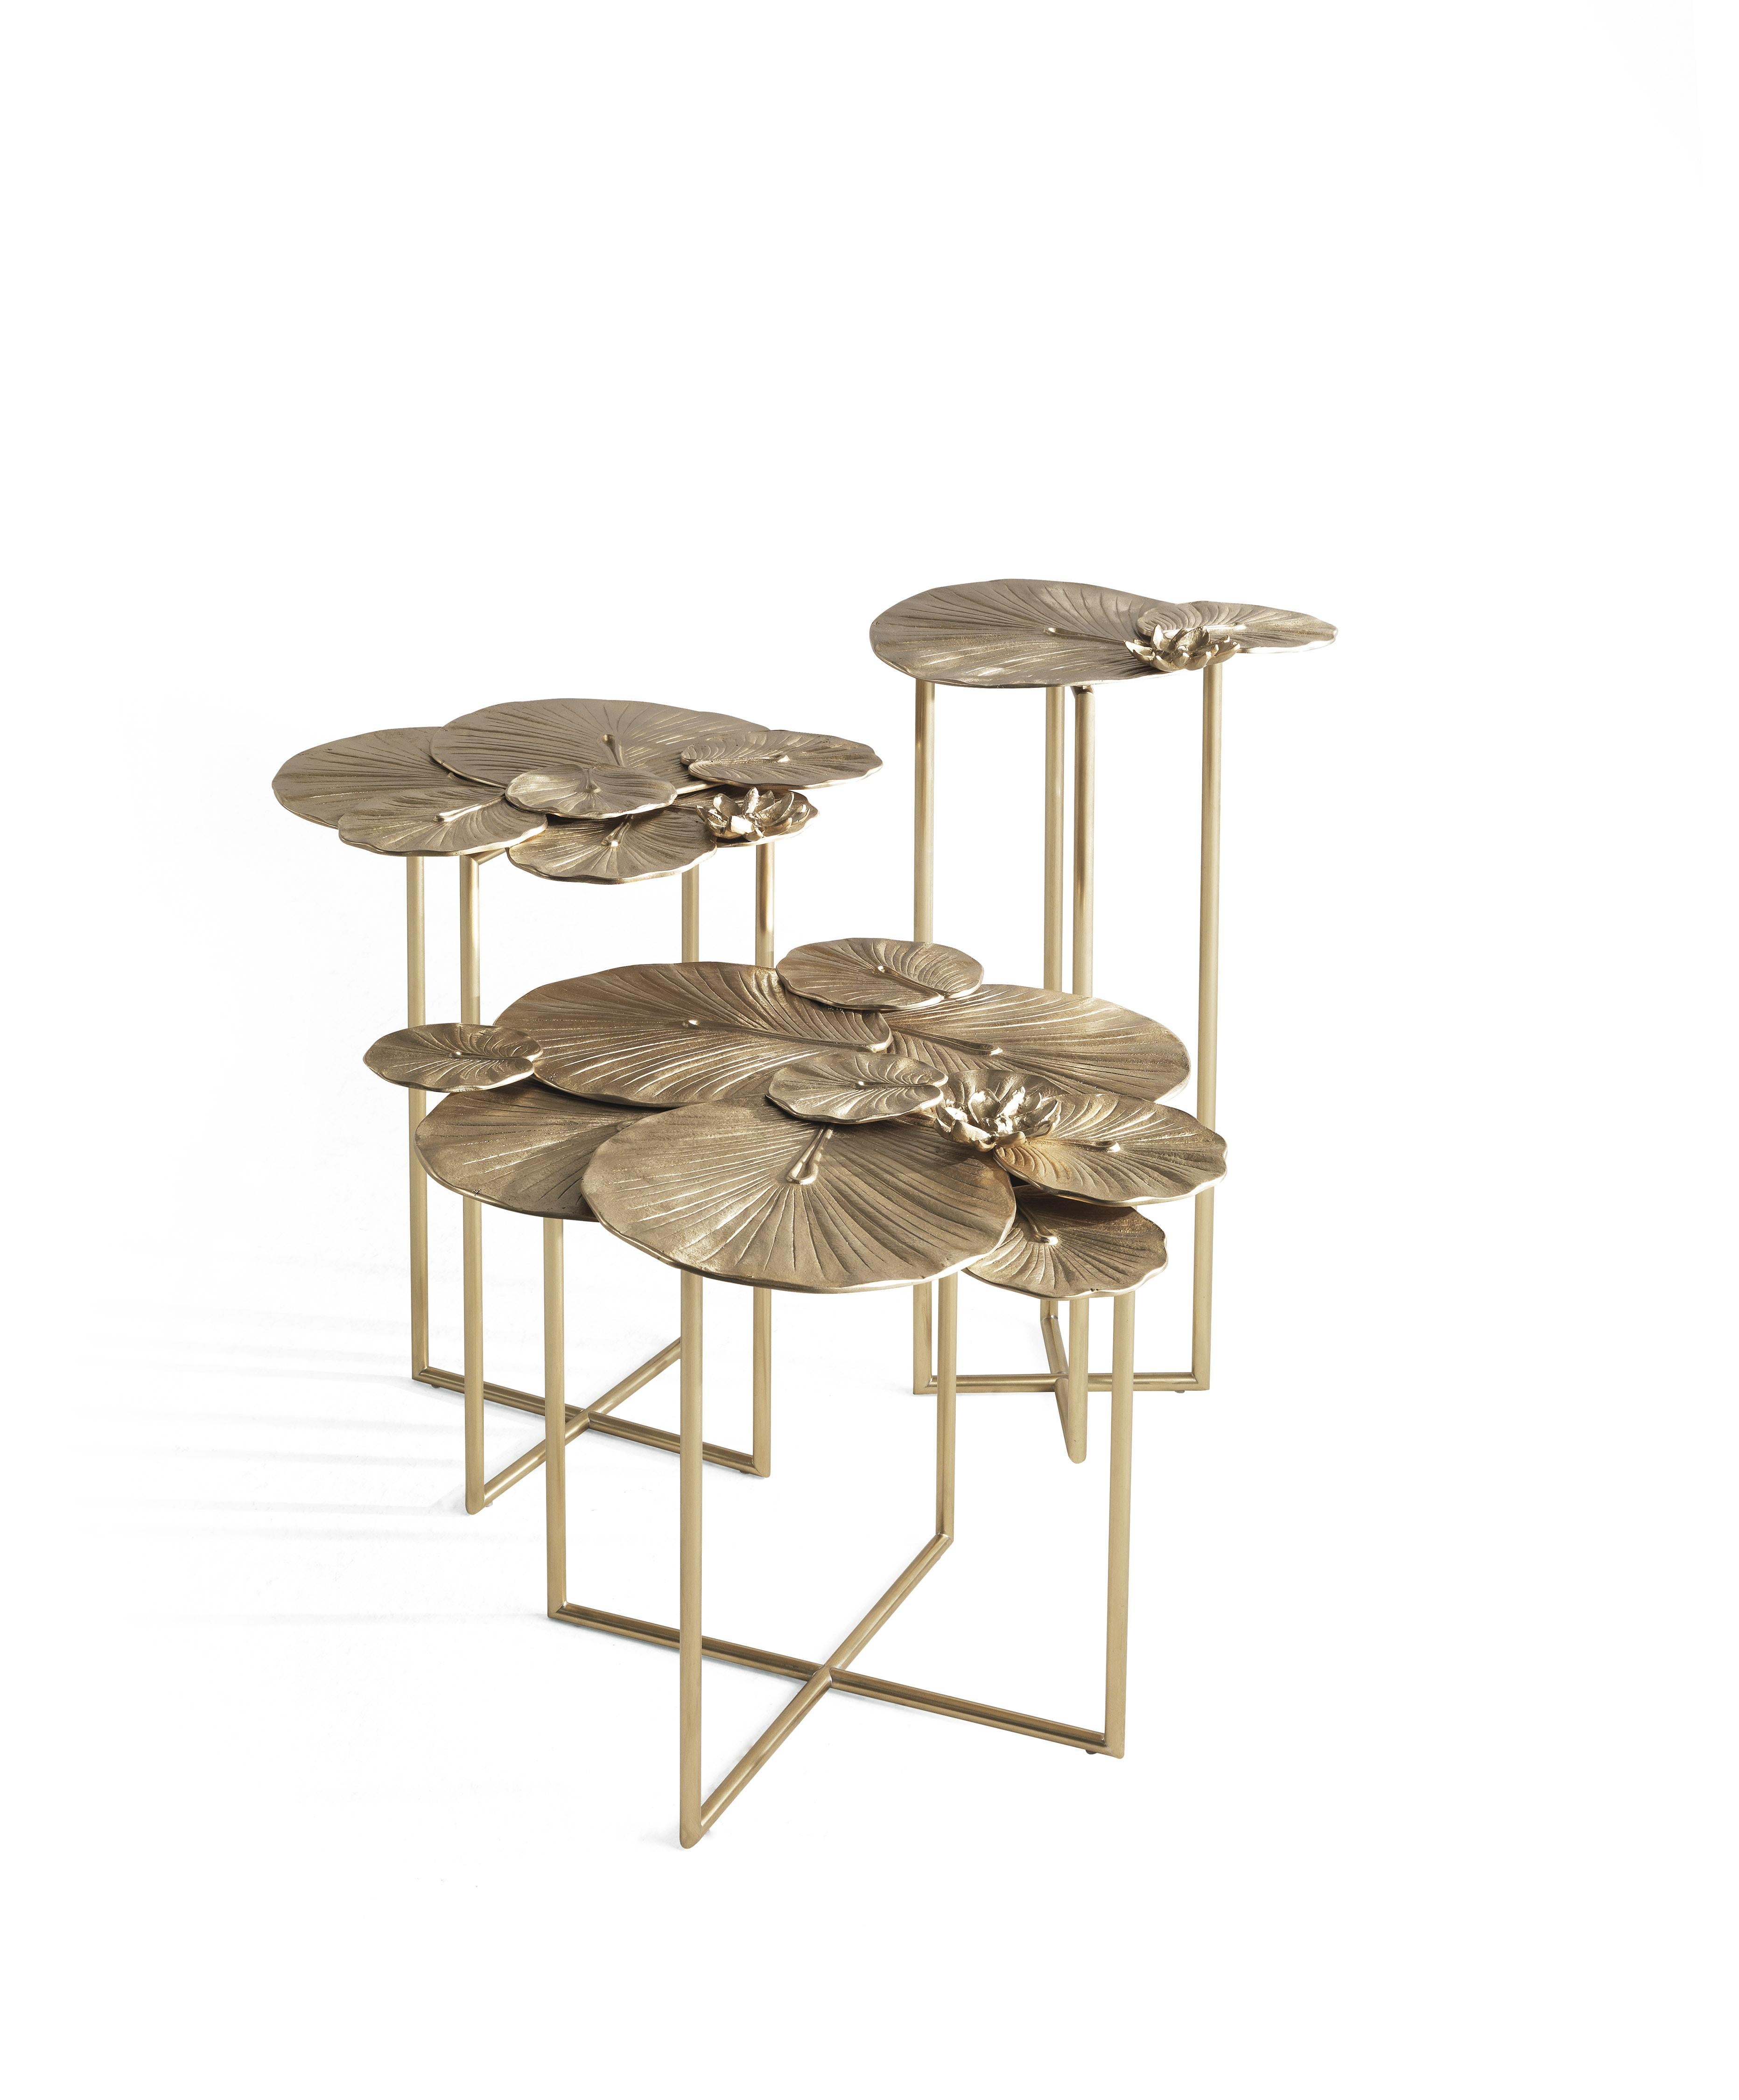 Italian 21st Century Monet Large Side Table in Hand-chiseled Cast Brass For Sale